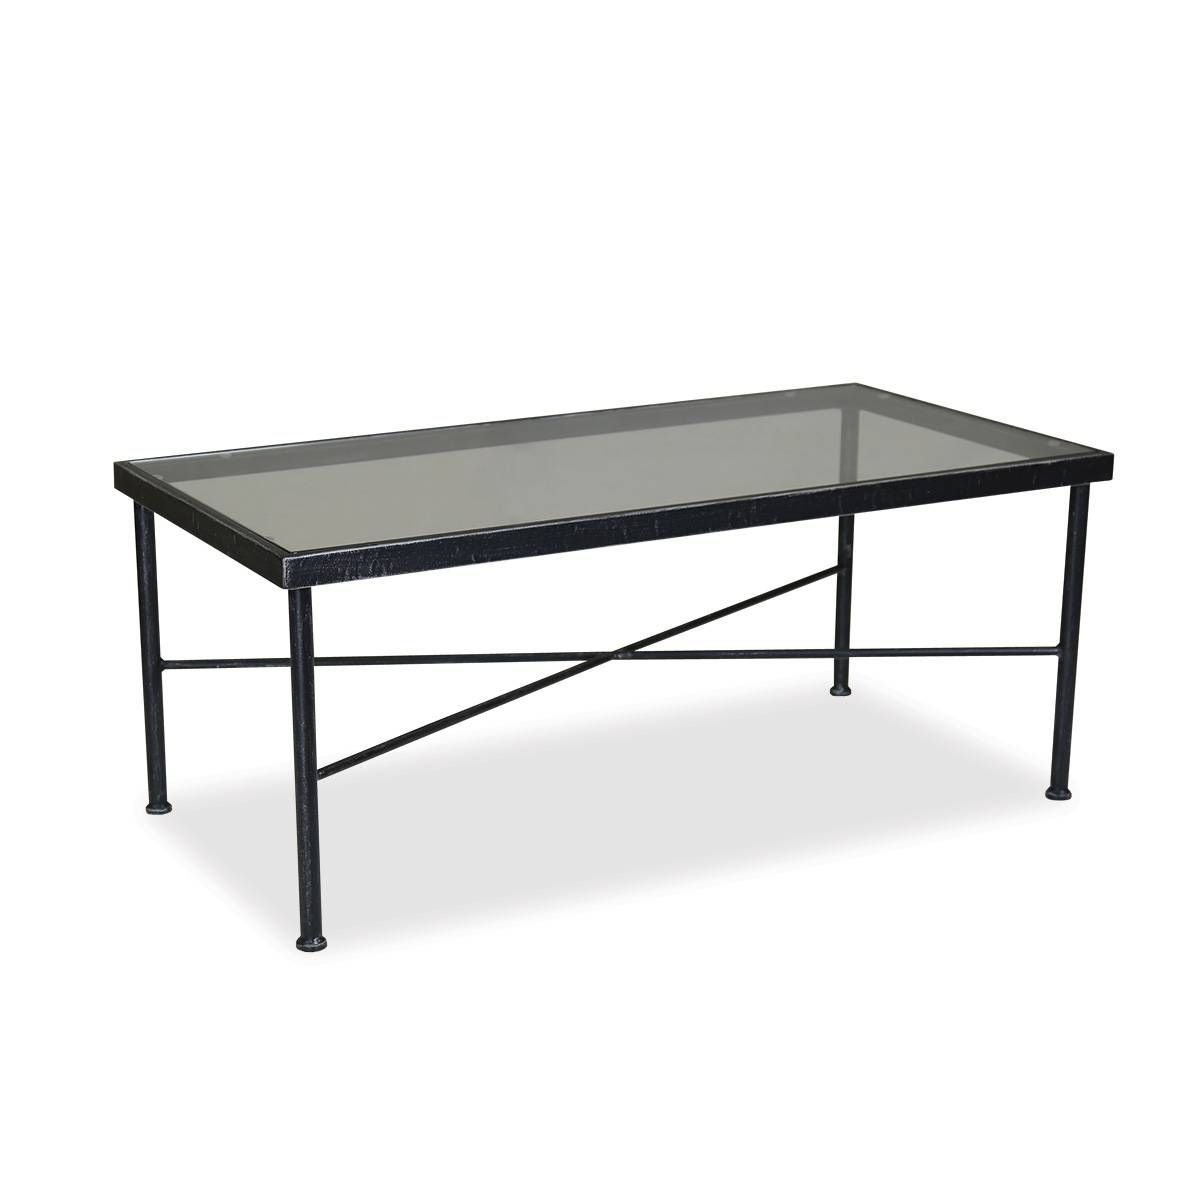 Wrought Iron Coffee Table | Sonoma Collection Within Wrought Iron Coffee Tables (View 3 of 30)